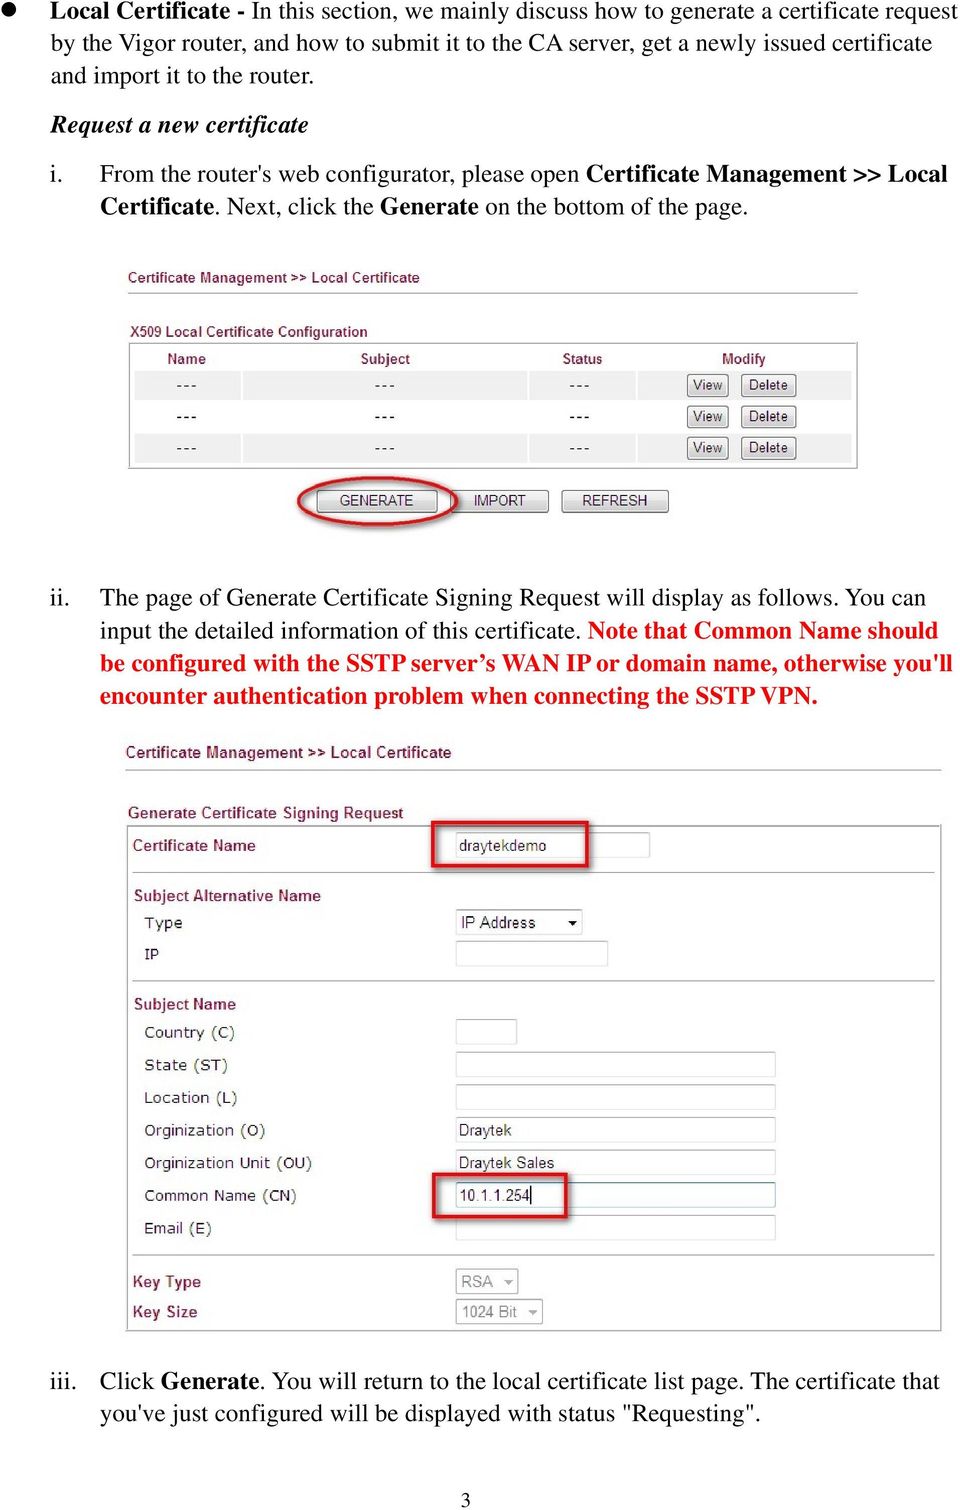 The page of Generate Certificate Signing Request will display as follows. You can input the detailed information of this certificate.